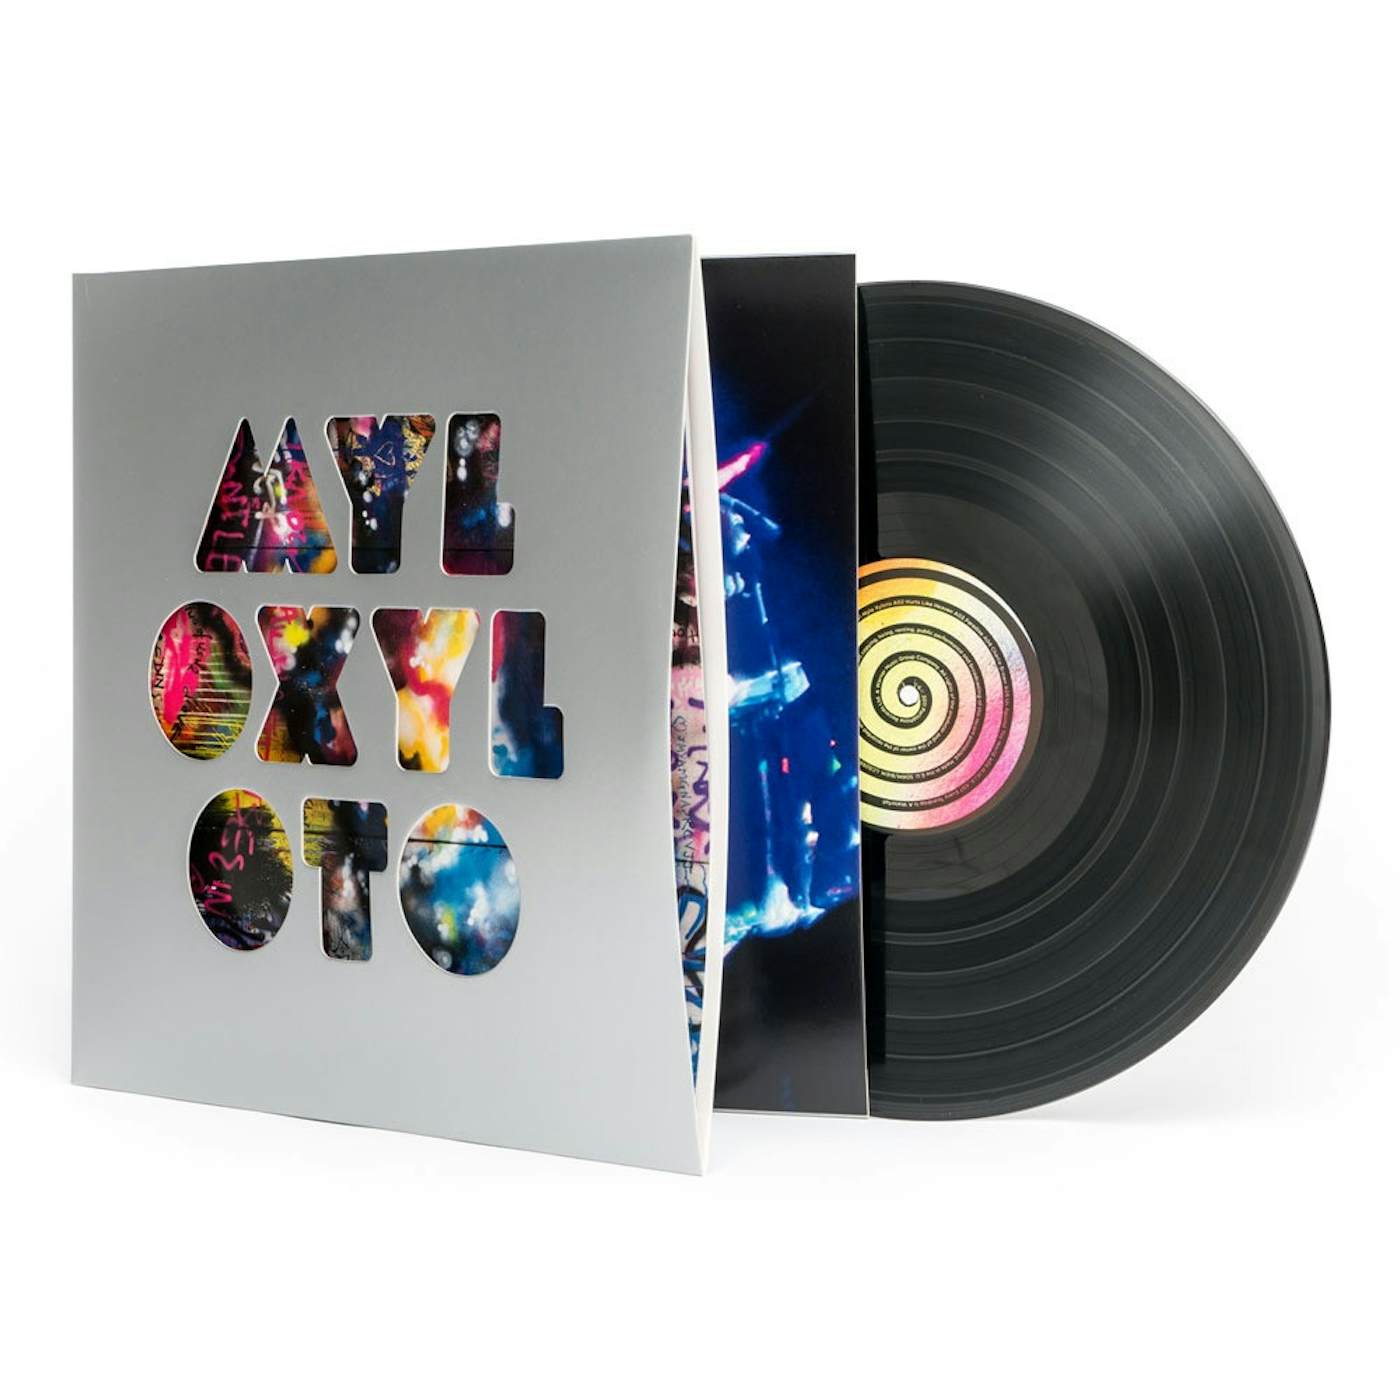 Coldplay - Music Of The Spheres (Colored Vinyl) new